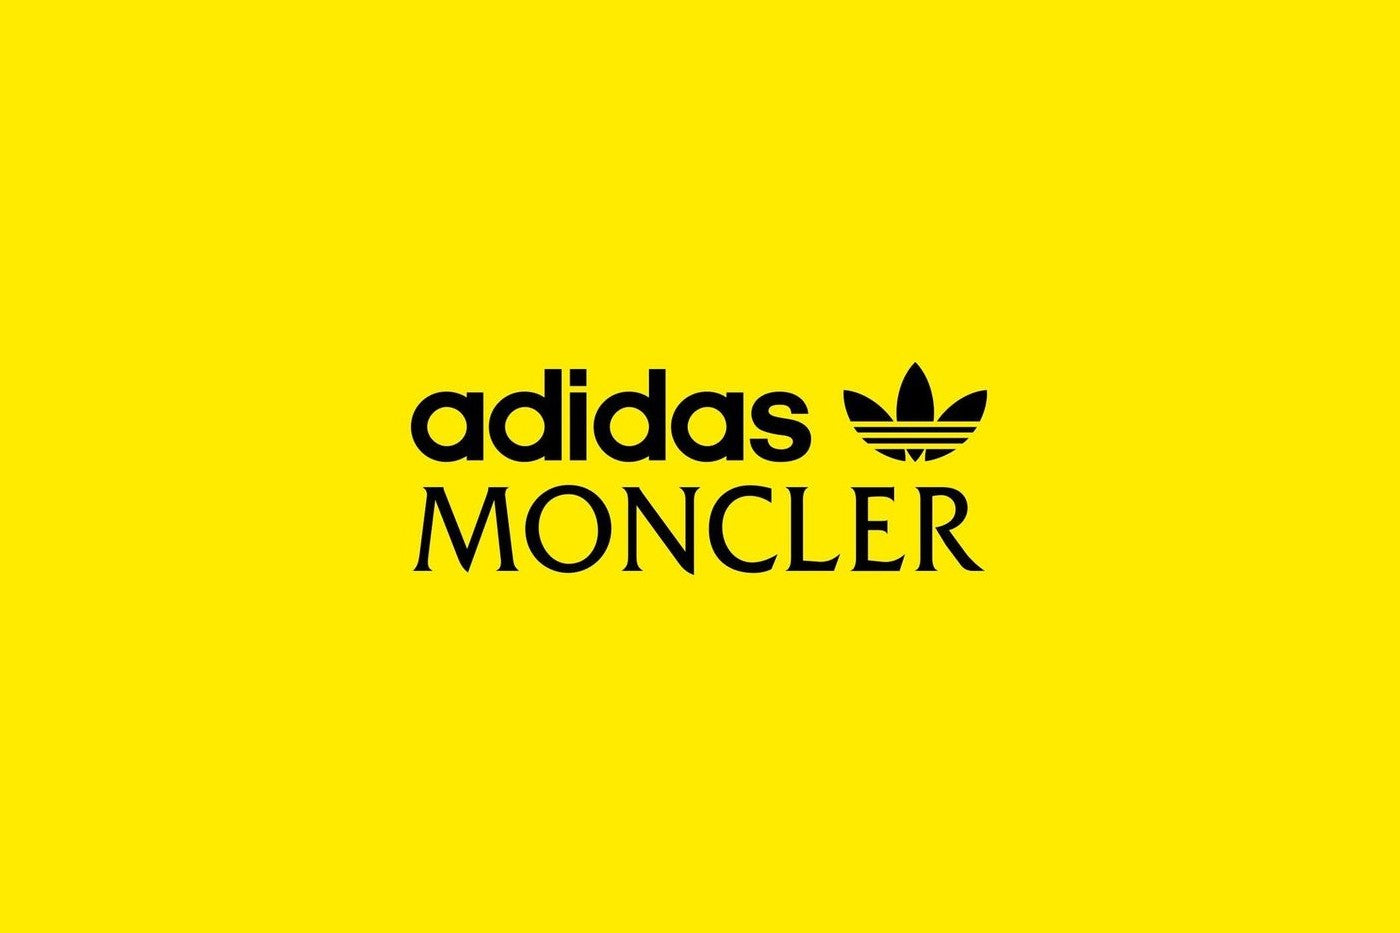 Everything We Know So Far About the adidas x Moncler Collaboration